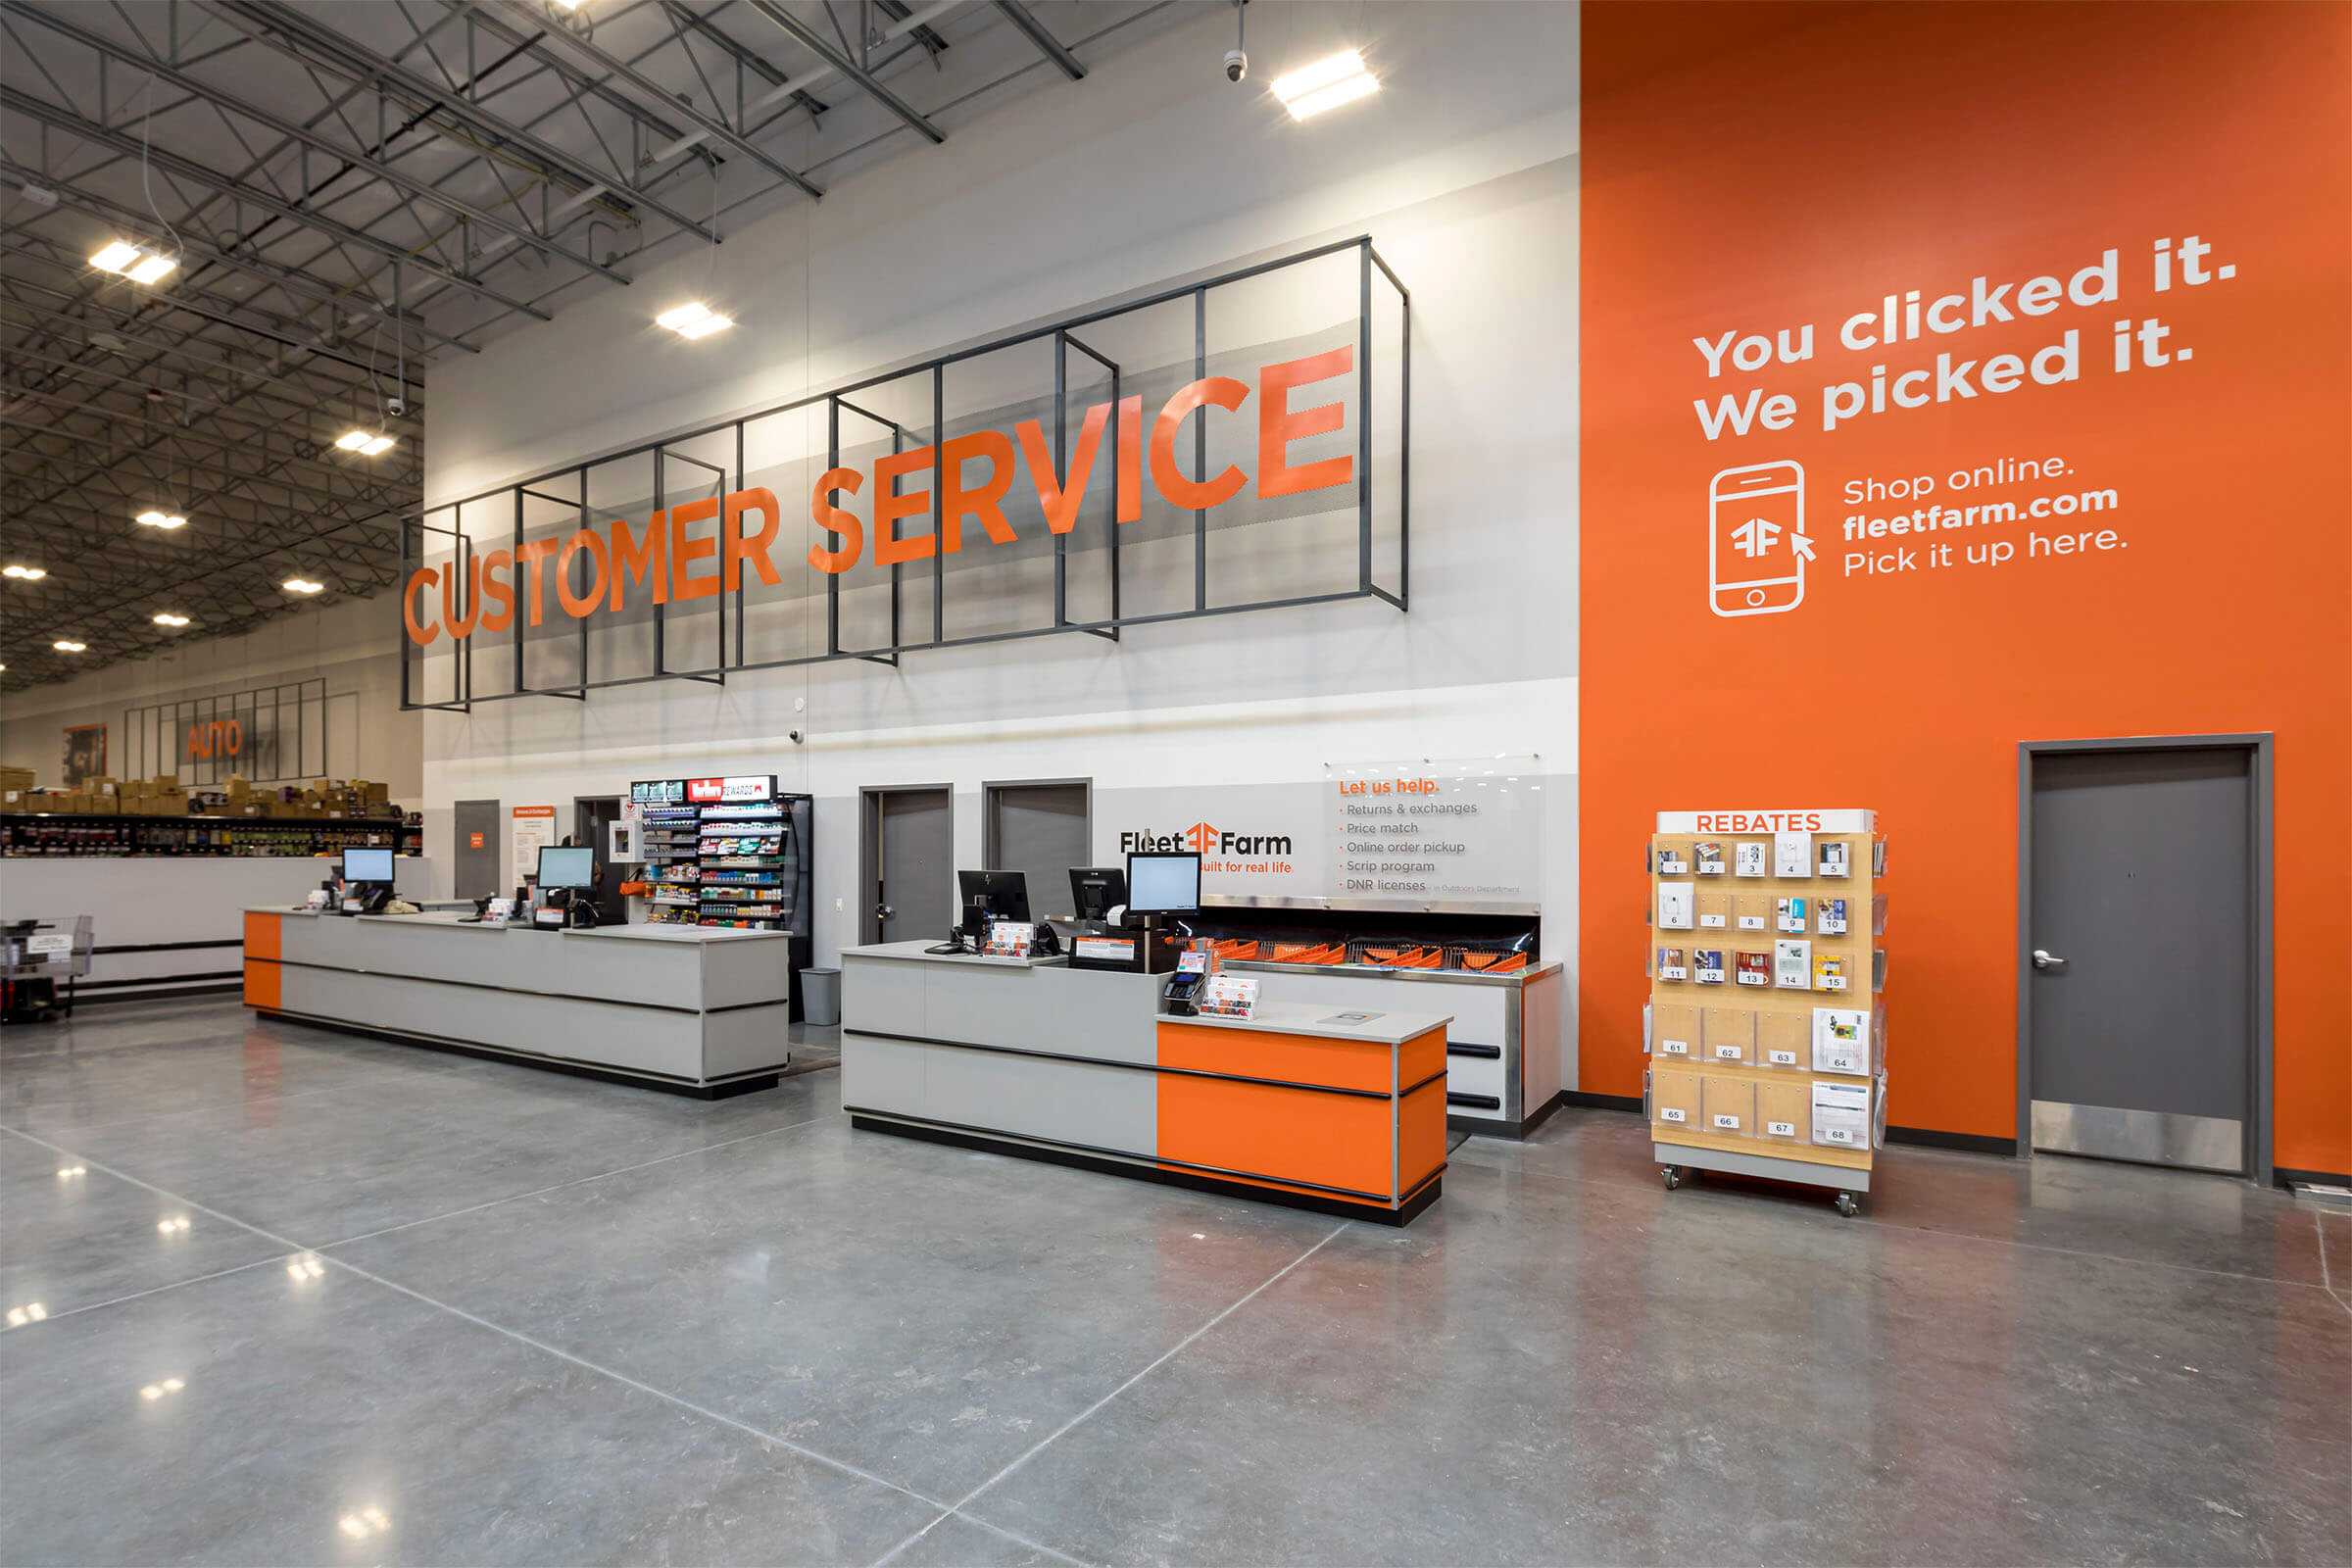 Customer service desk of a Mills Fleet Farm Store, with newly remodeled orange signage and walls, showcasing an industrial-themed store design.